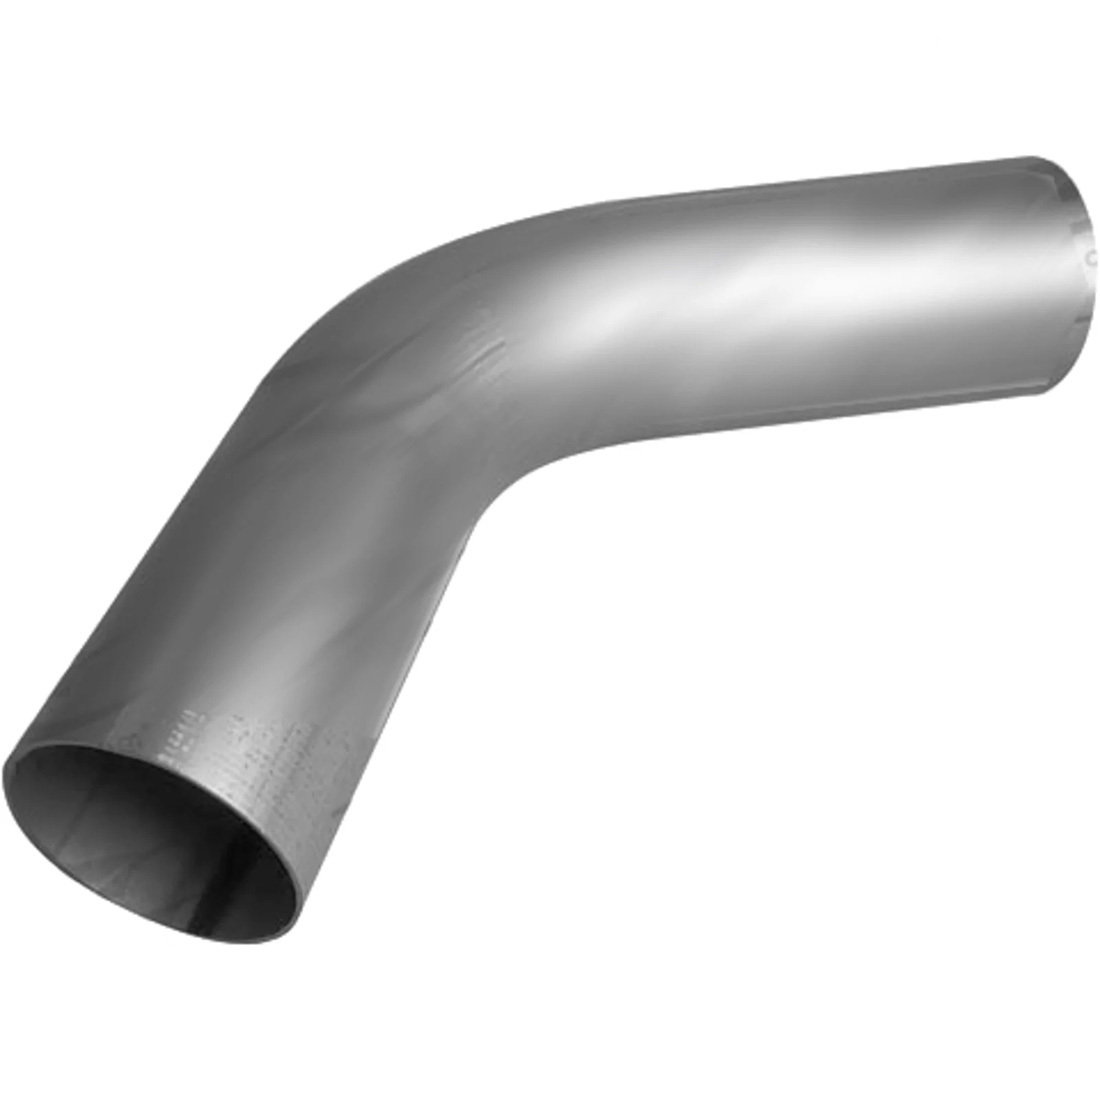 2 1/2" 60 Degrees Mandrel Bend Exhaust Pipe image